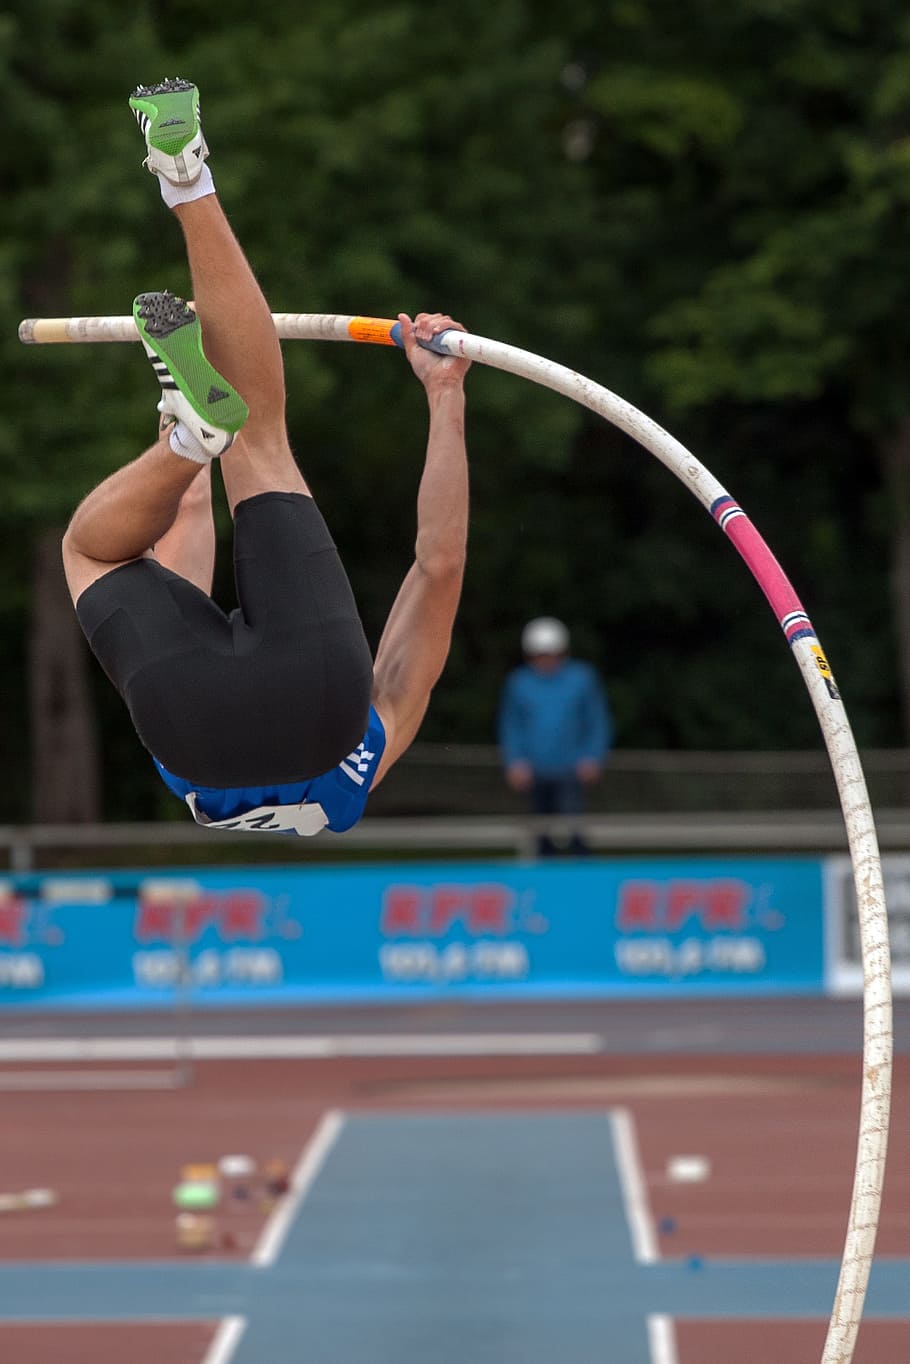 Athletics, Pole Vault, Sport, junior gala mannheim, skill, concentration, adults only, strength, adult, lifestyles